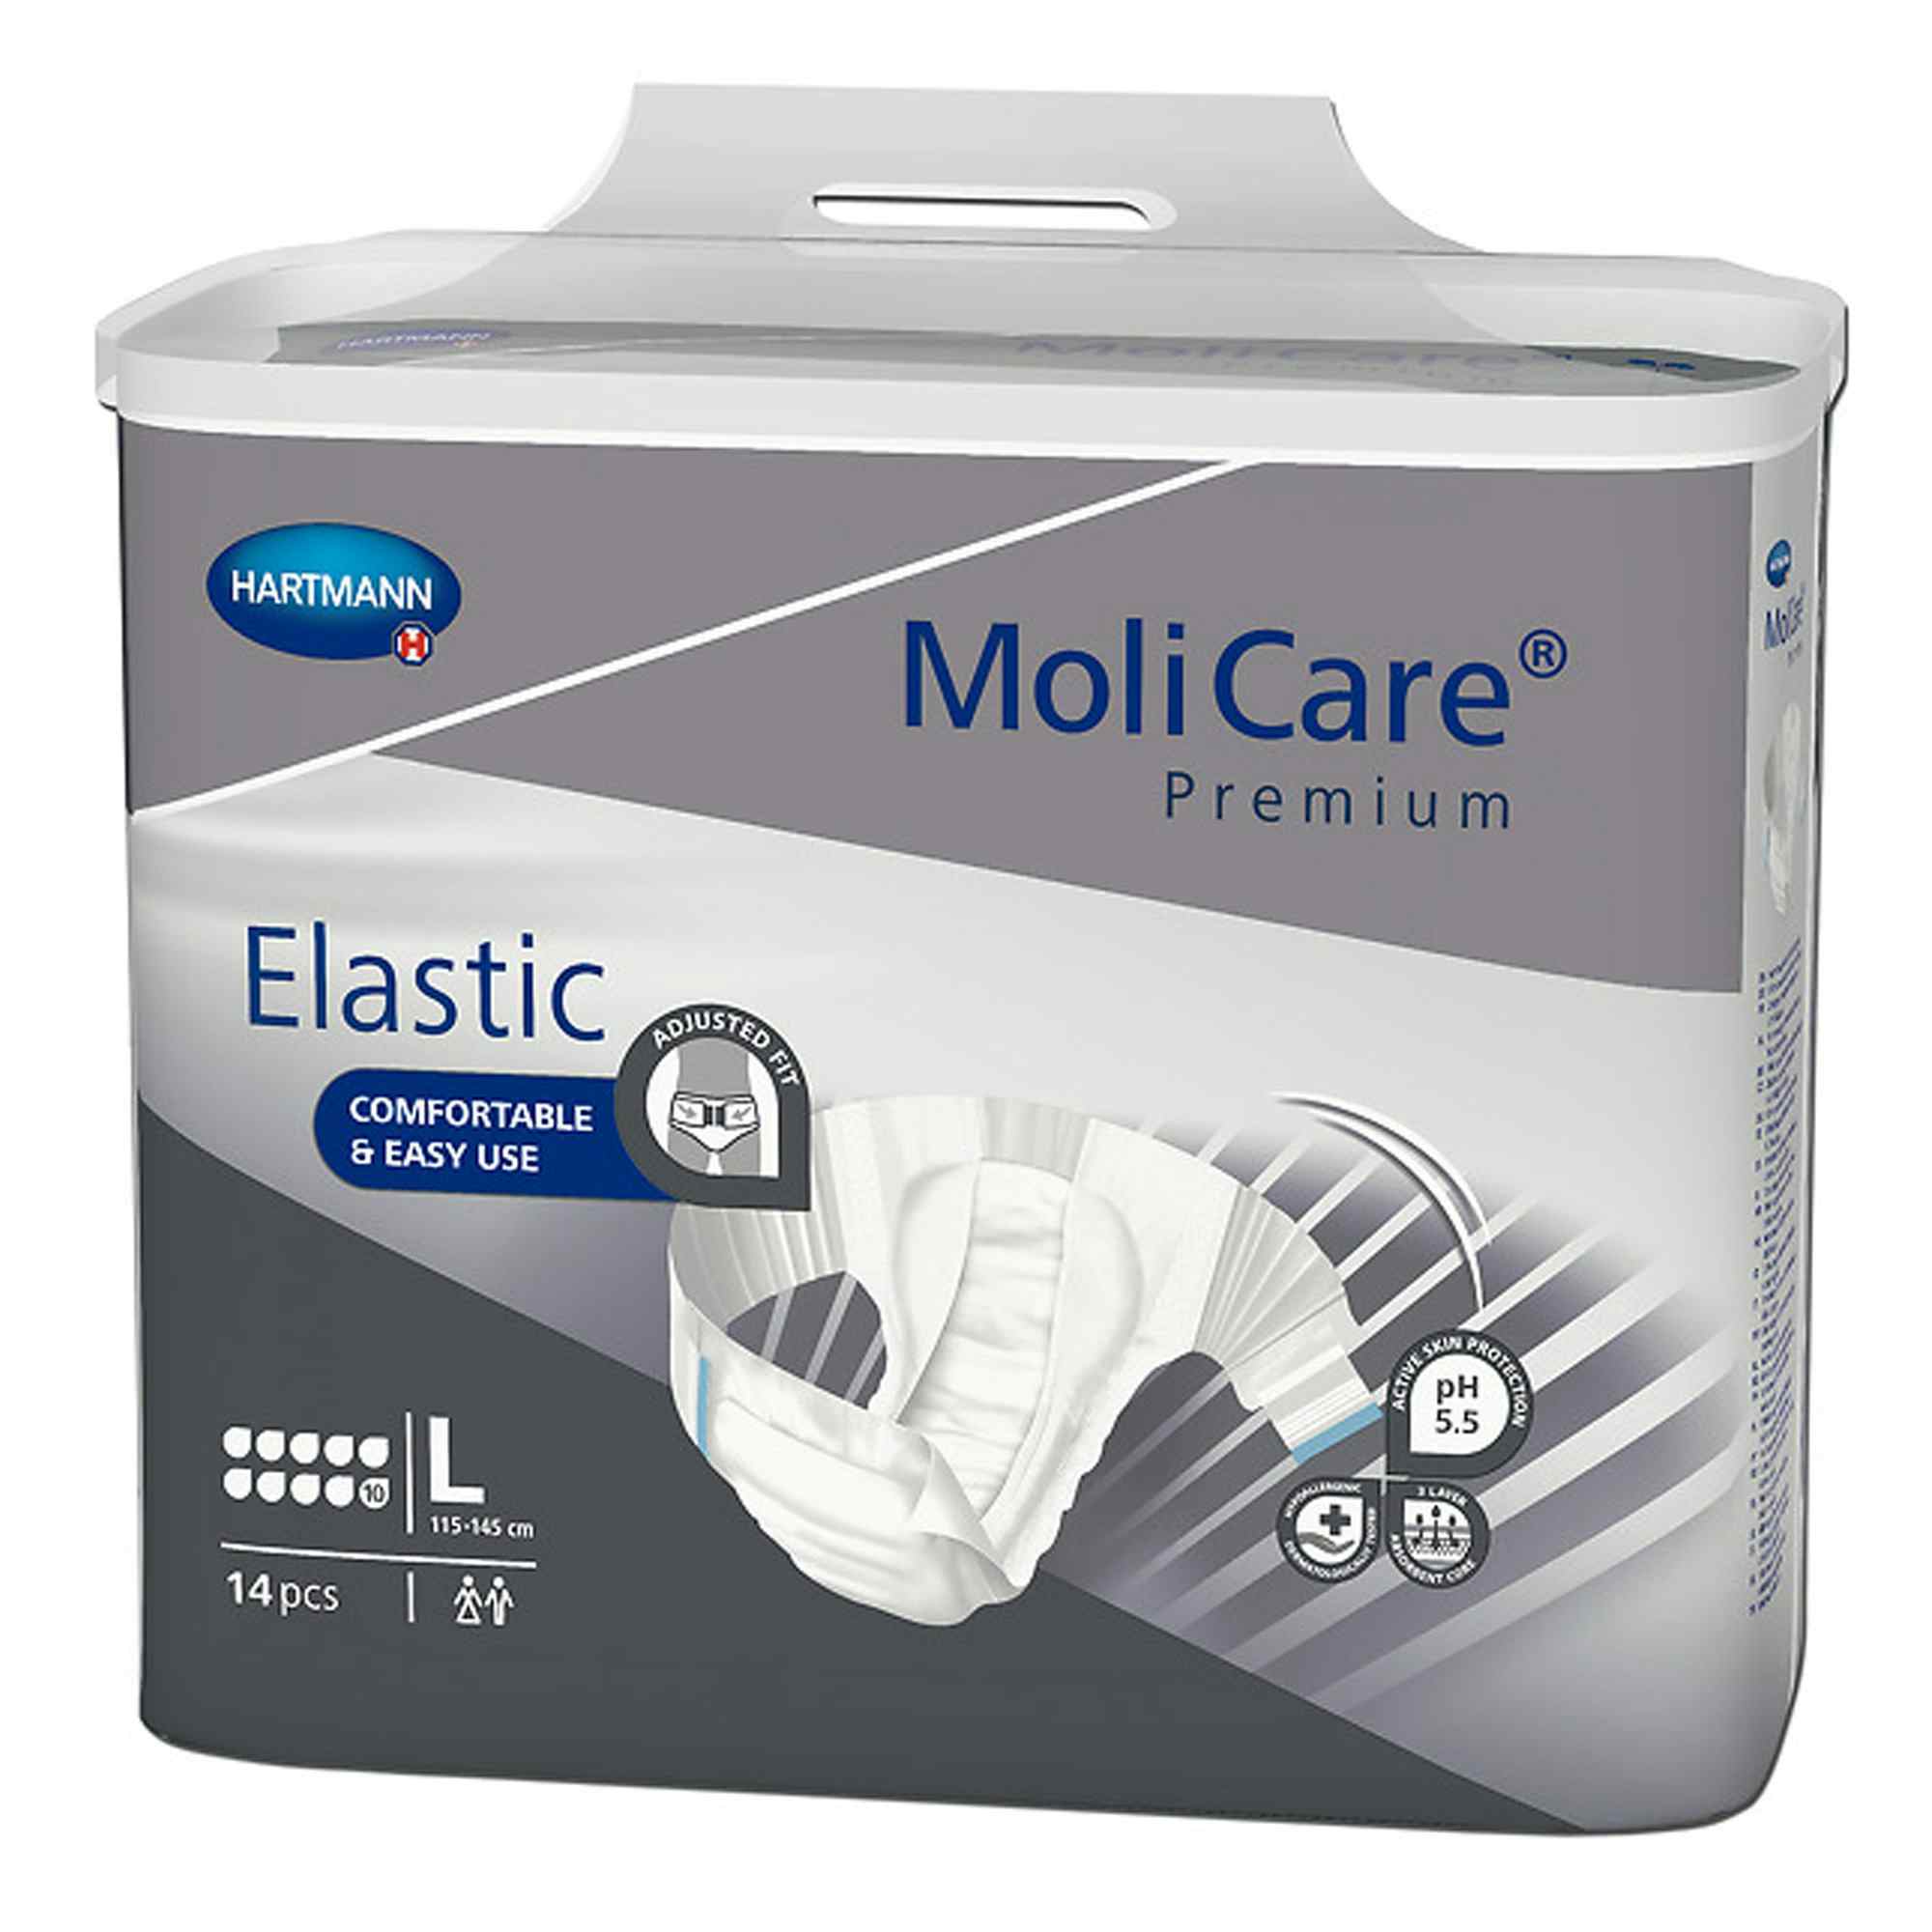 MoliCare Premium 10D Disposable Brief Adult Diapers with Tabs, Heavy Absorbency, 165673, Large (45-57") - Pack of 14